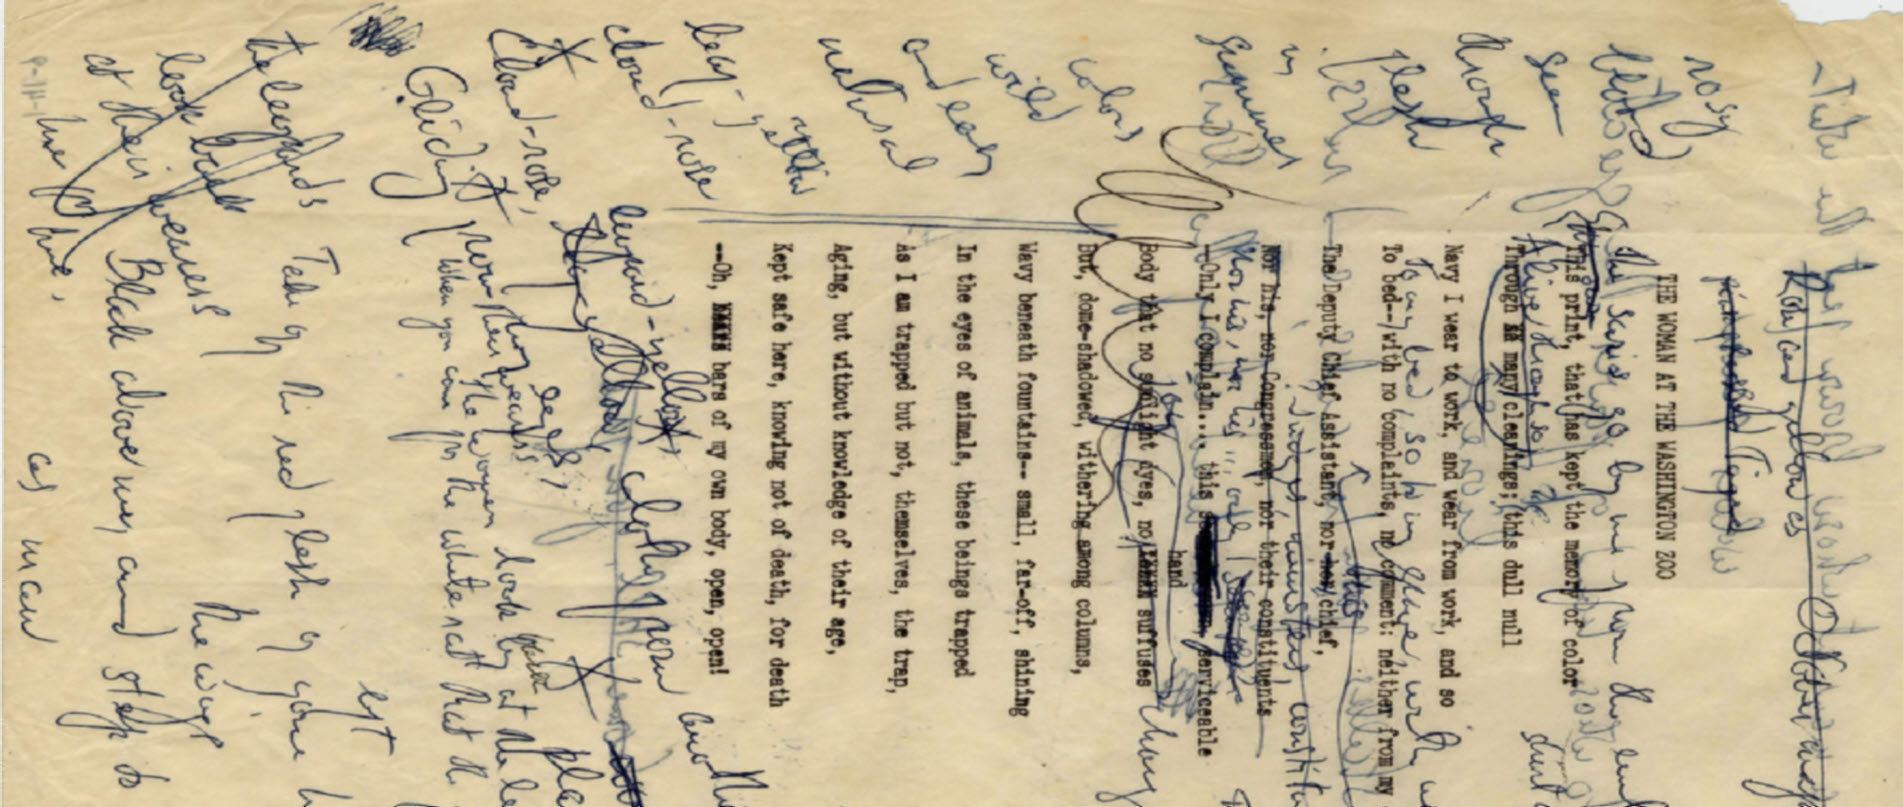 image of a typed poem with handwritten notes in the margin